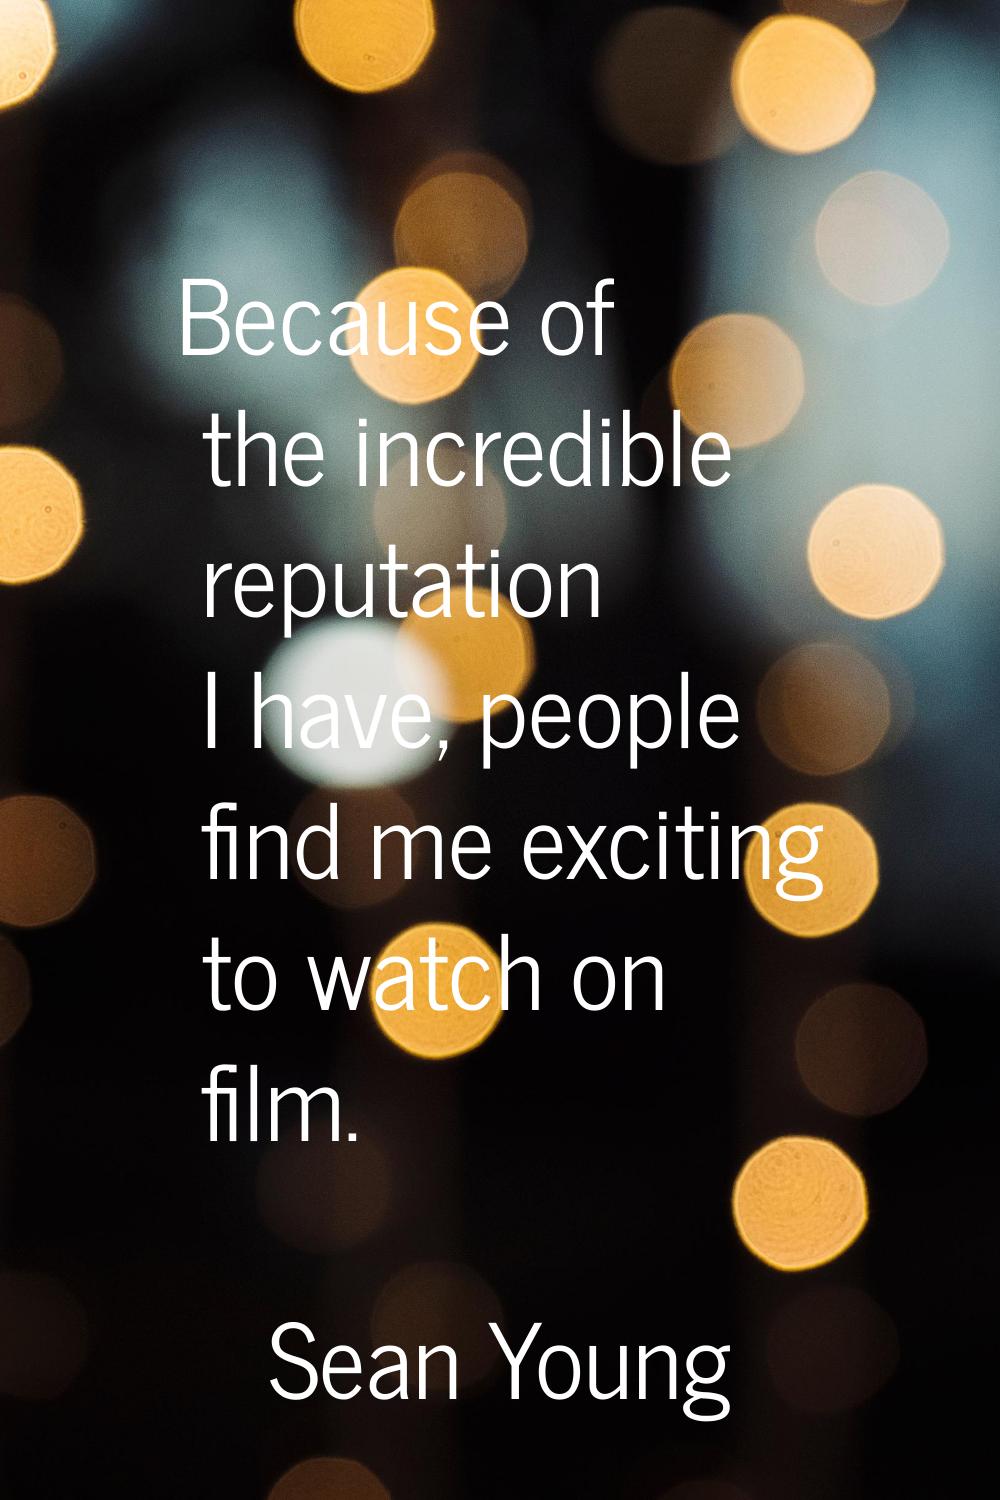 Because of the incredible reputation I have, people find me exciting to watch on film.